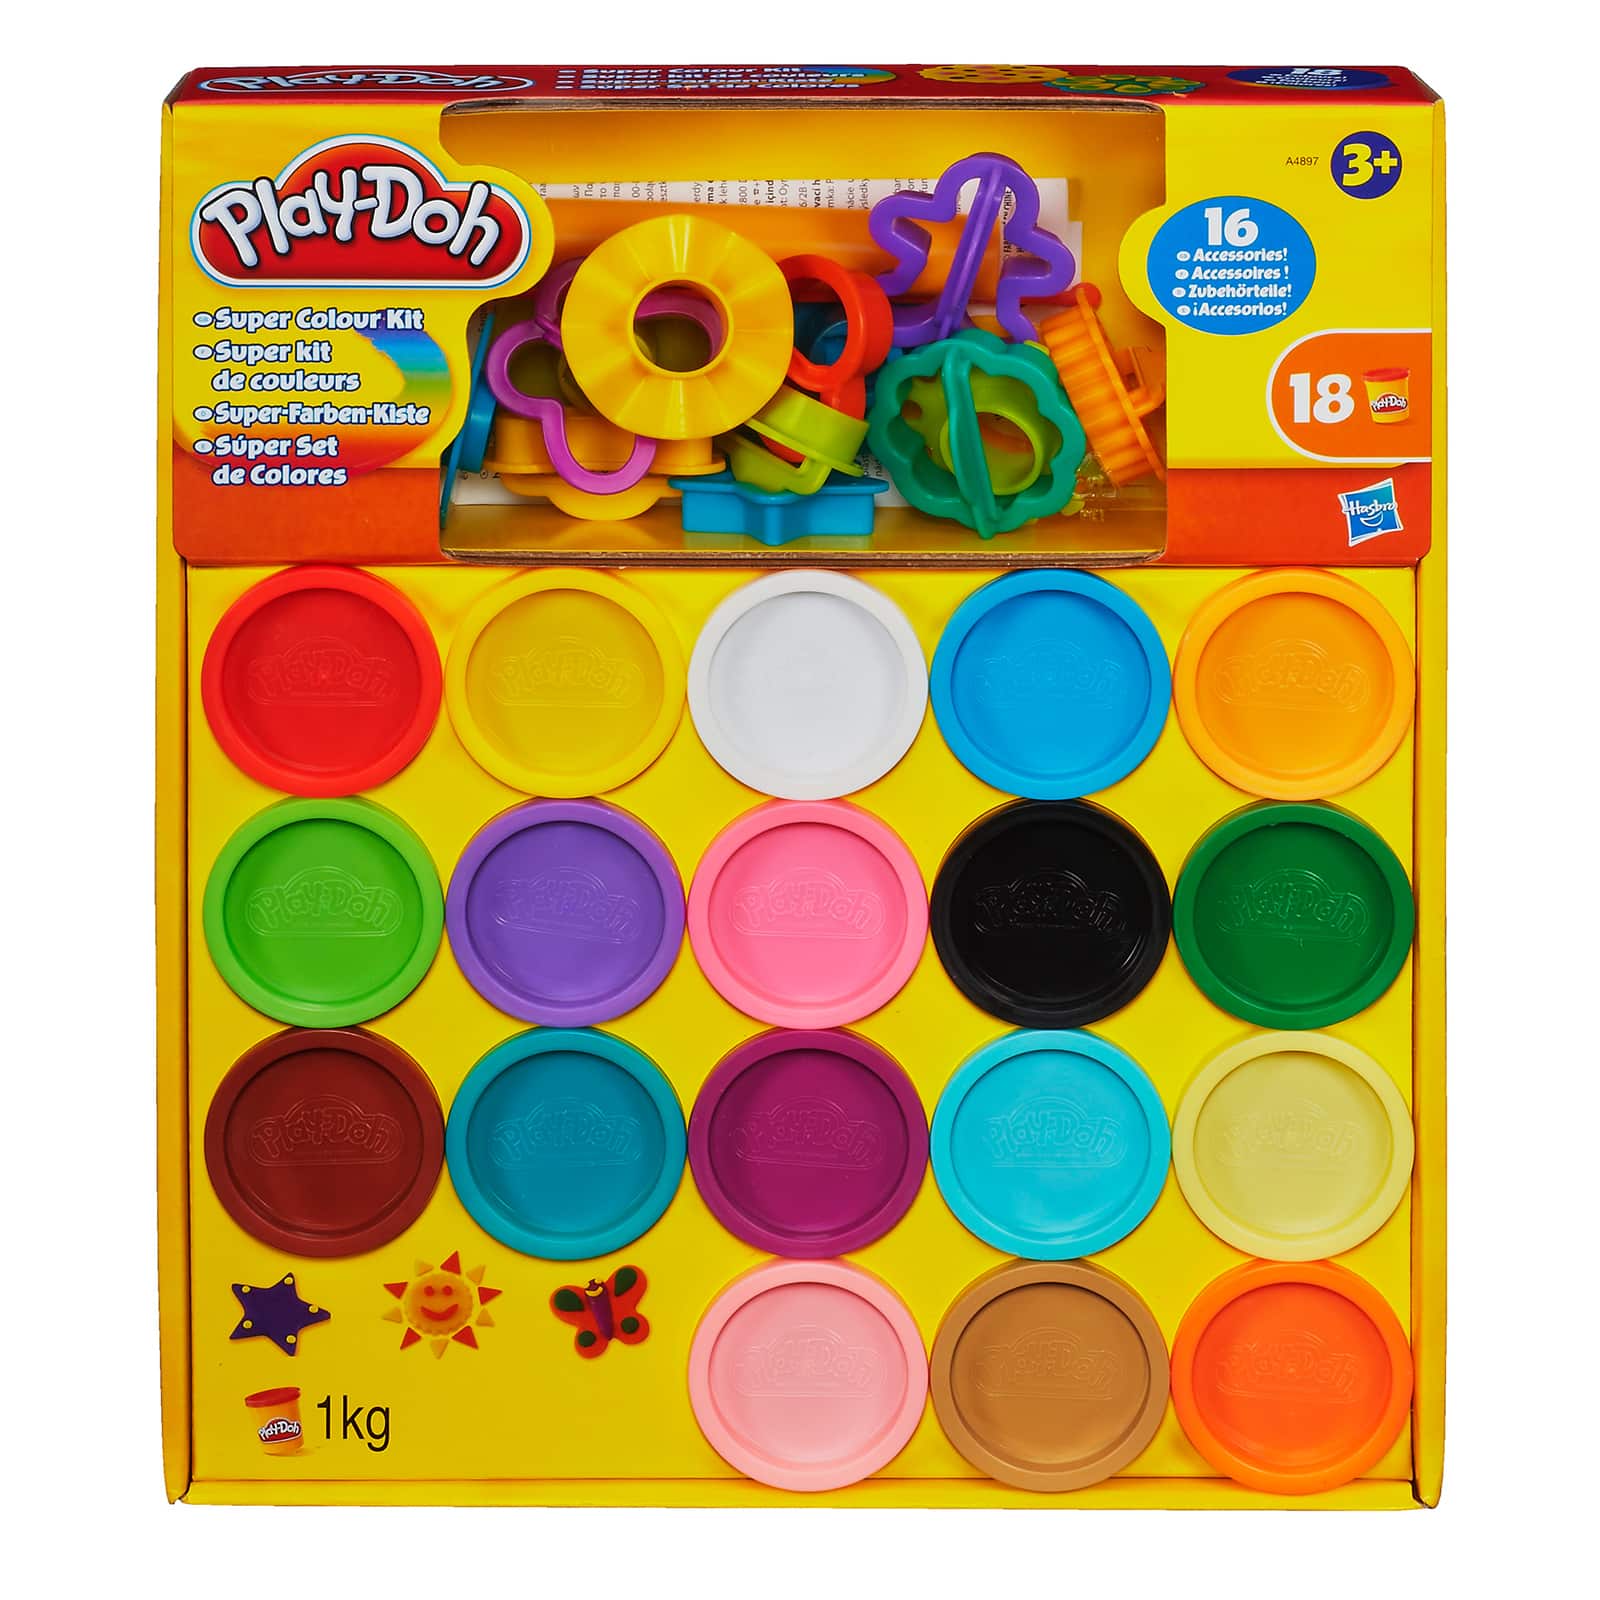 Play-Doh® Super Color Kit at Michaels